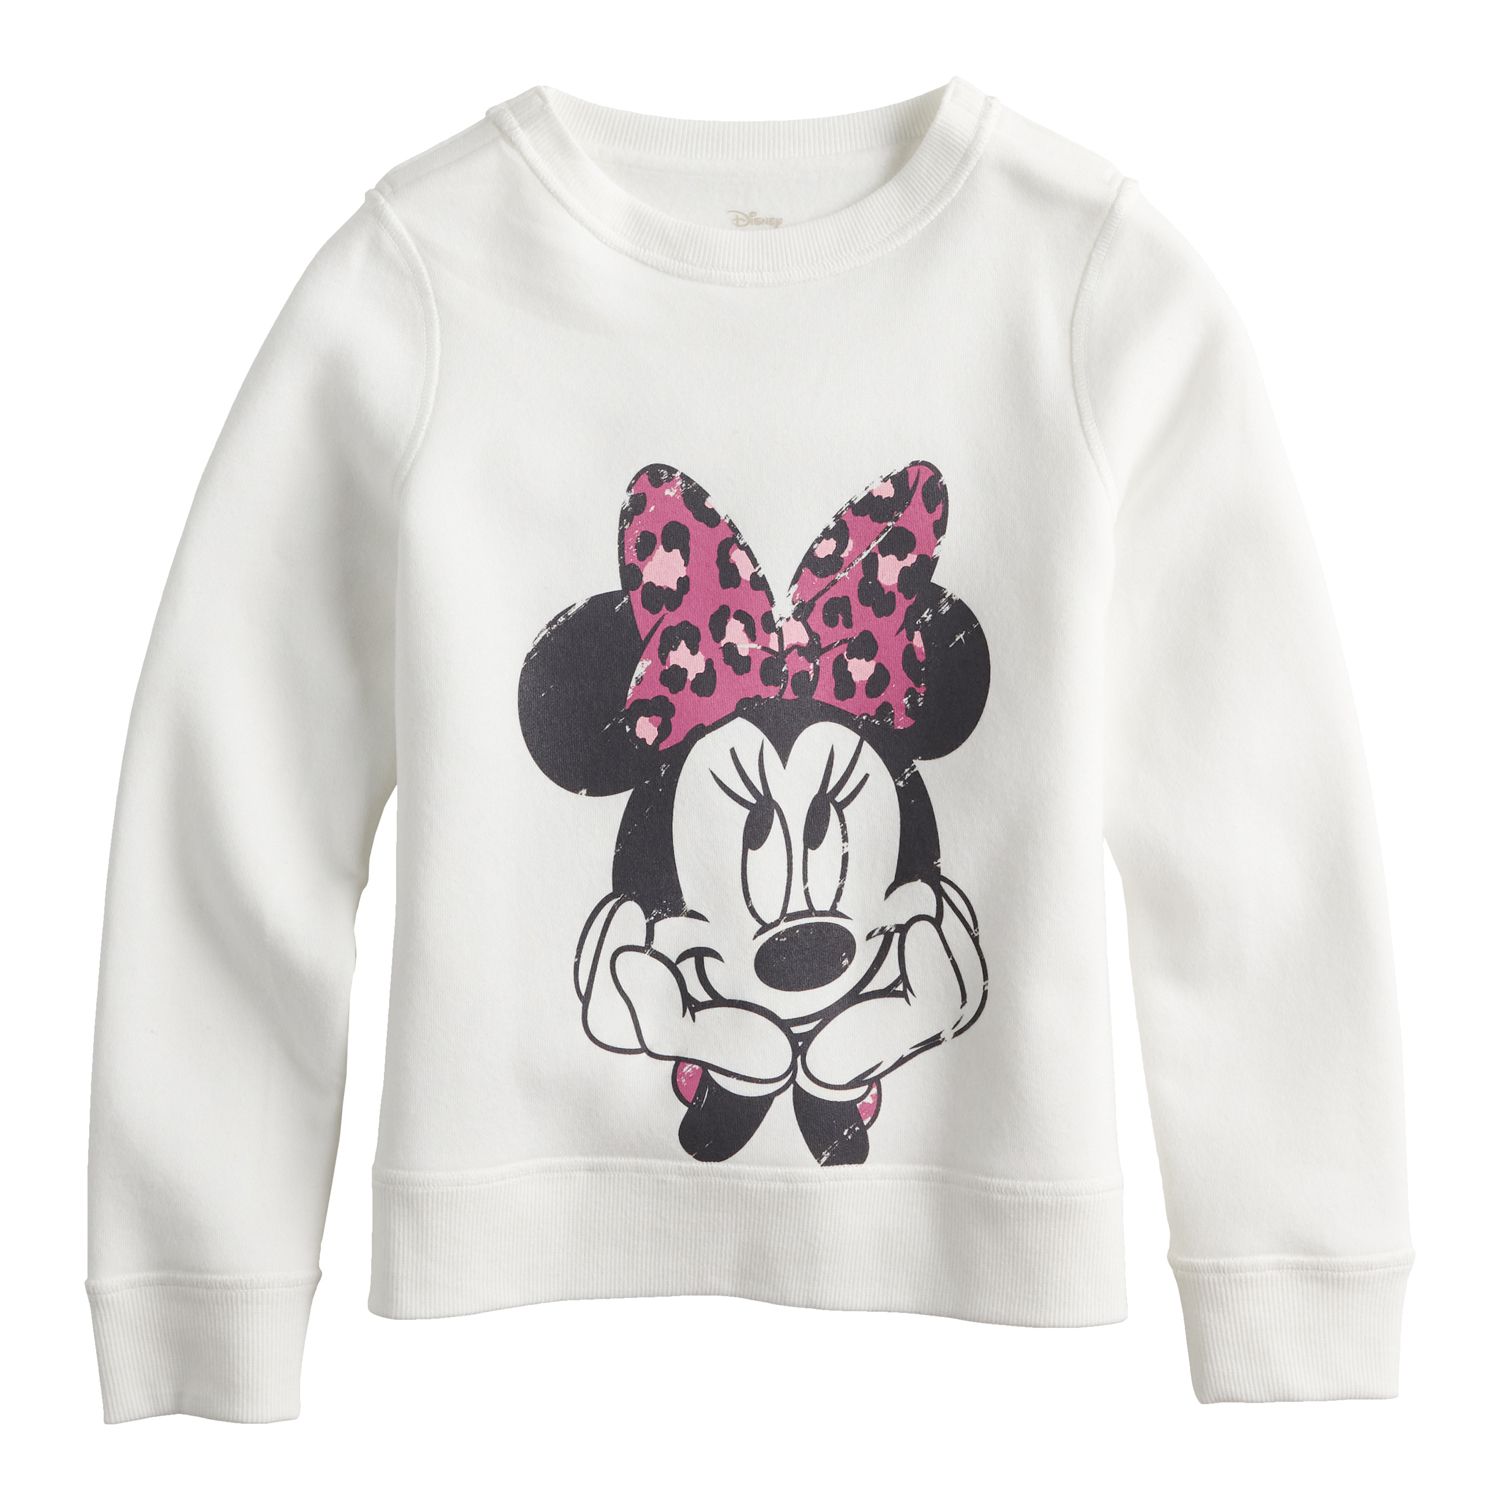 Image for Disney/Jumping Beans Disney's Minnie Mouse Toddler Girl Adaptive Crewneck Pullover Top by Jumping Beans® at Kohl's.